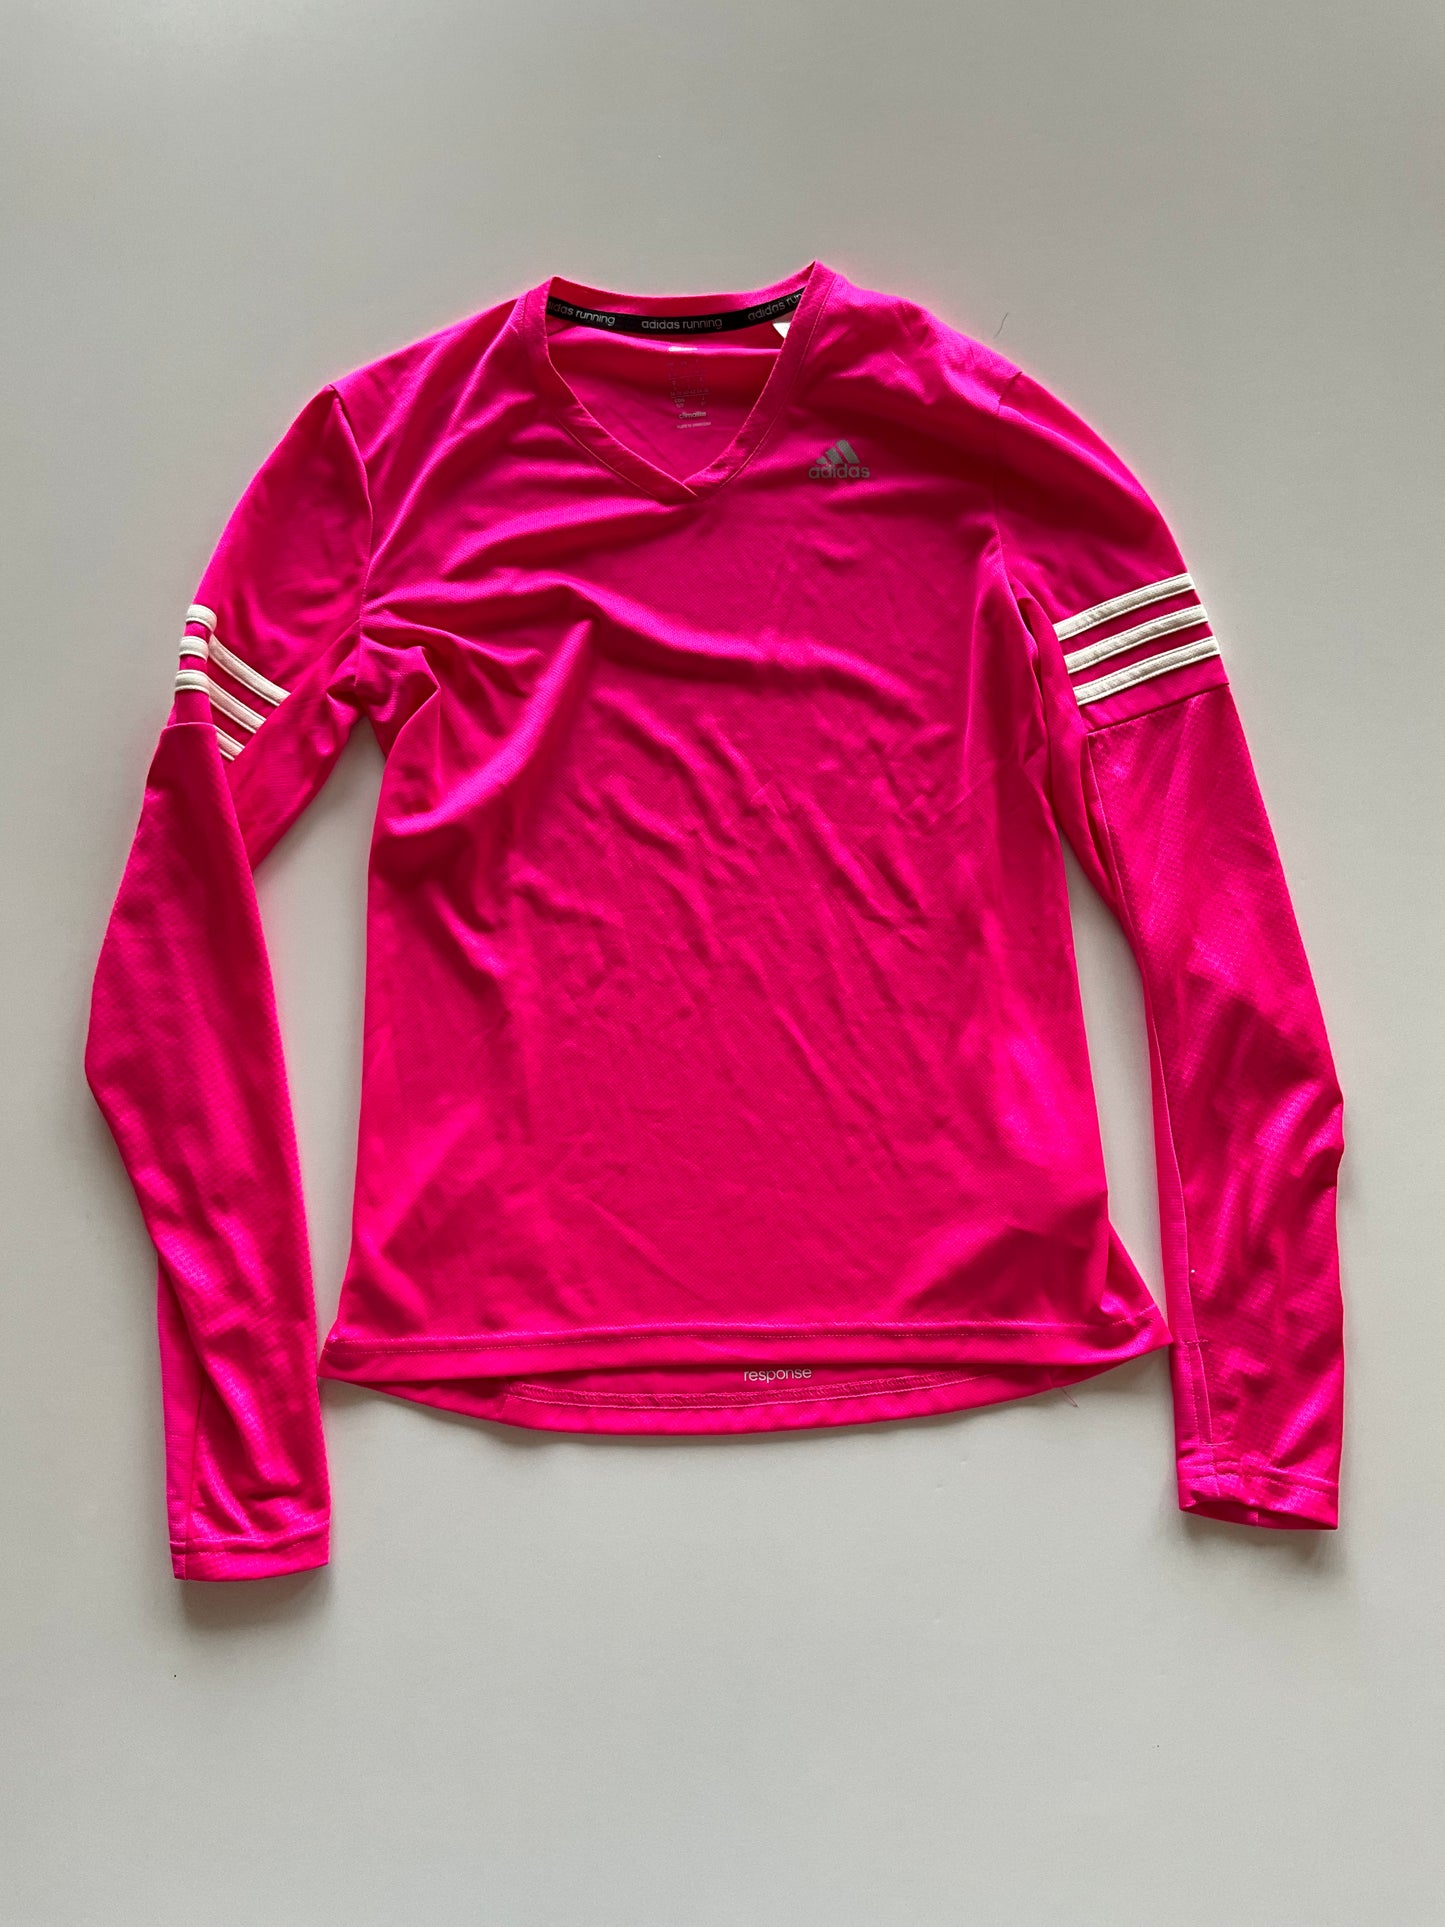 Neon Pink Athletic Shirt